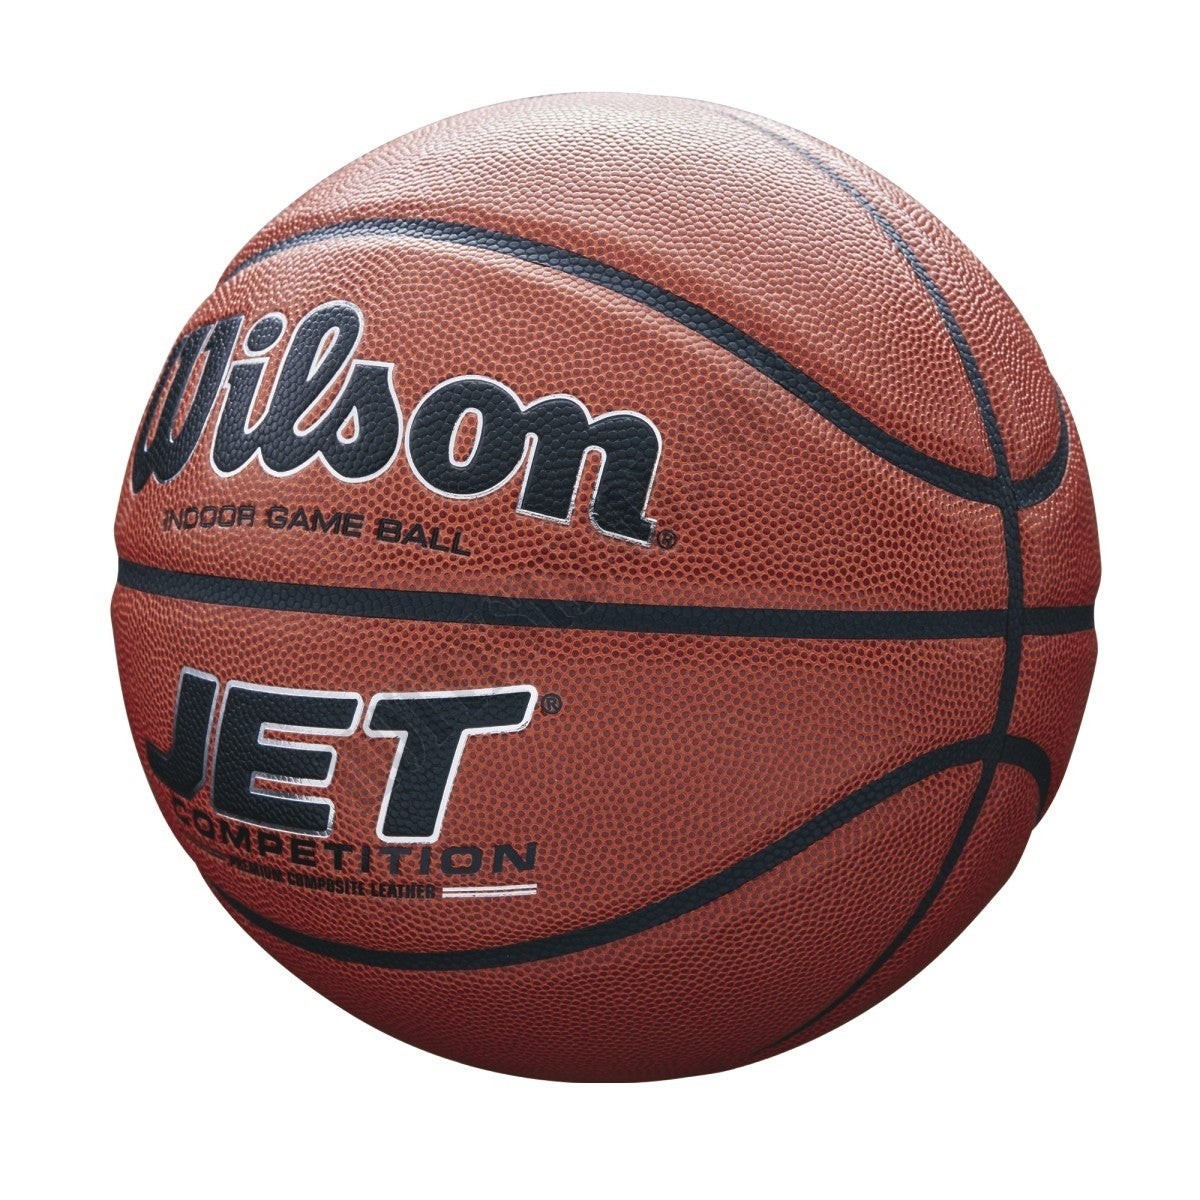 Jet Competition Basketball - Wilson Discount Store - -1